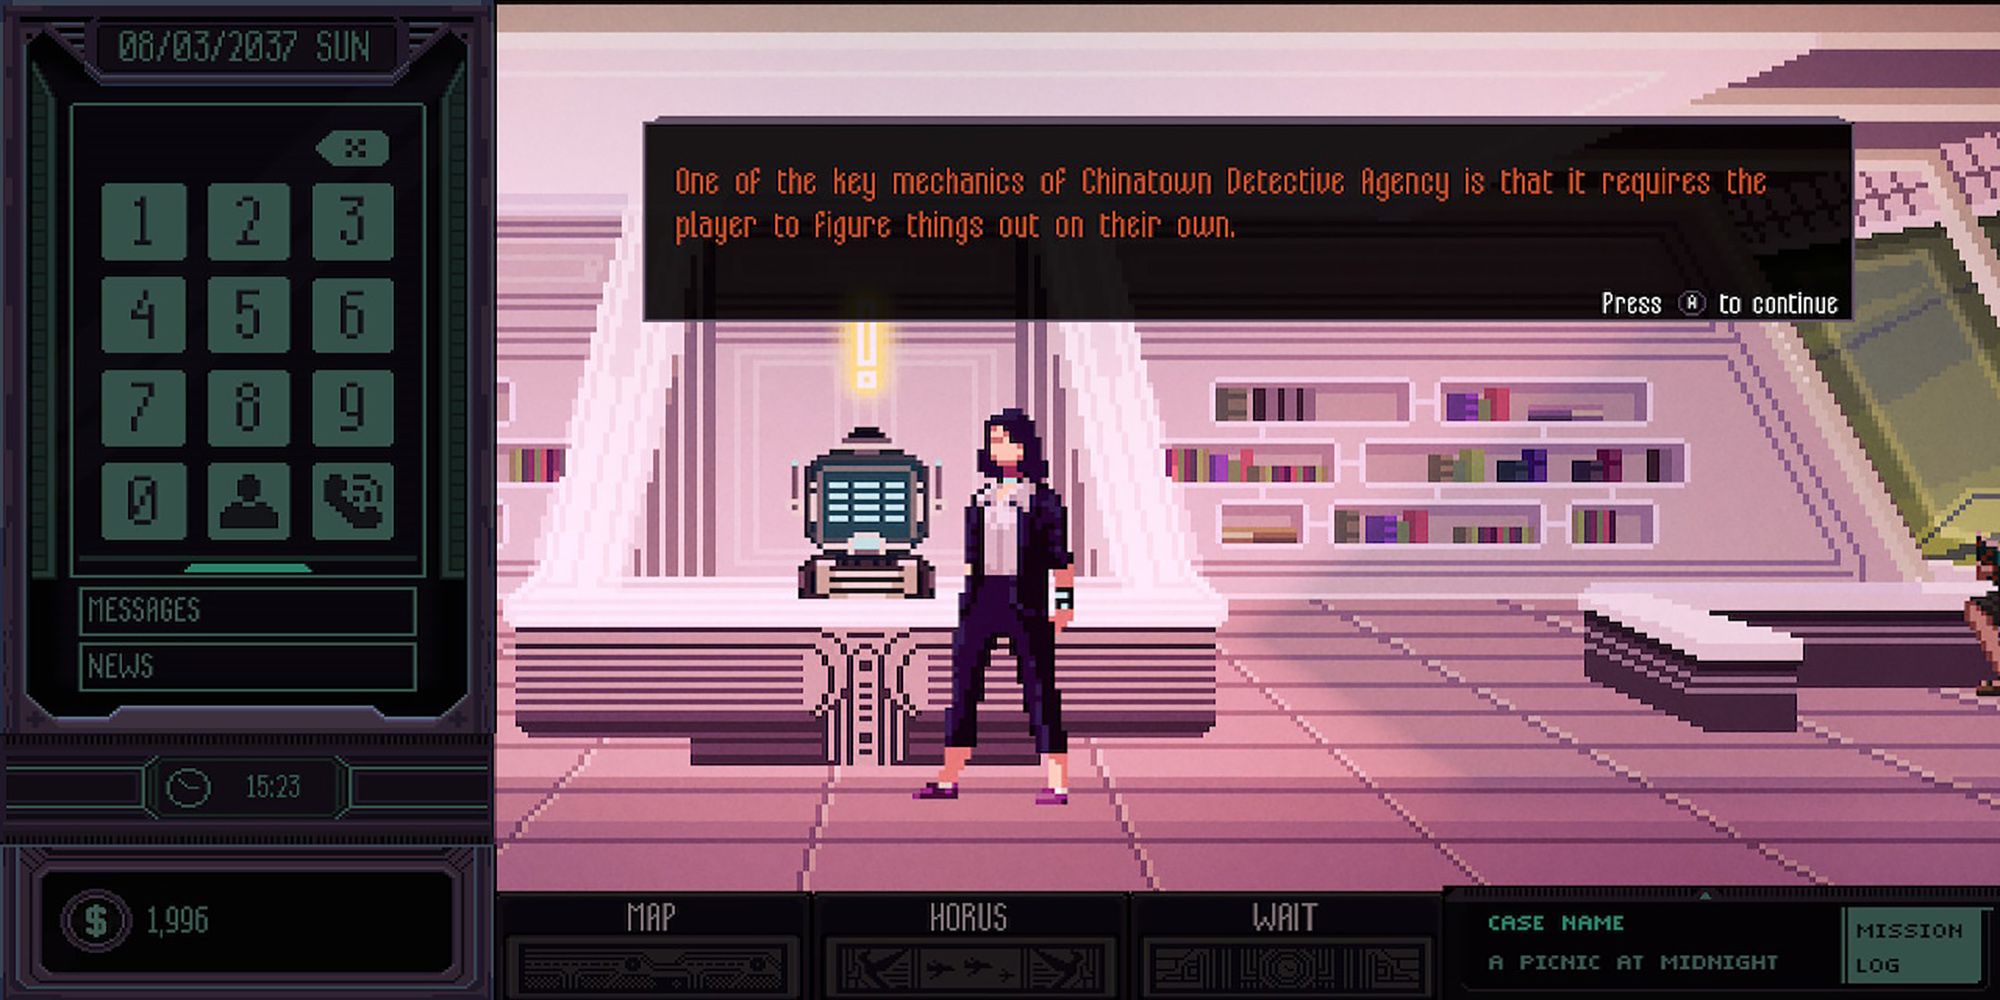 The game tutorial instructs the player that they need to do their own research to solve clues in Chinatown Detective Agency.